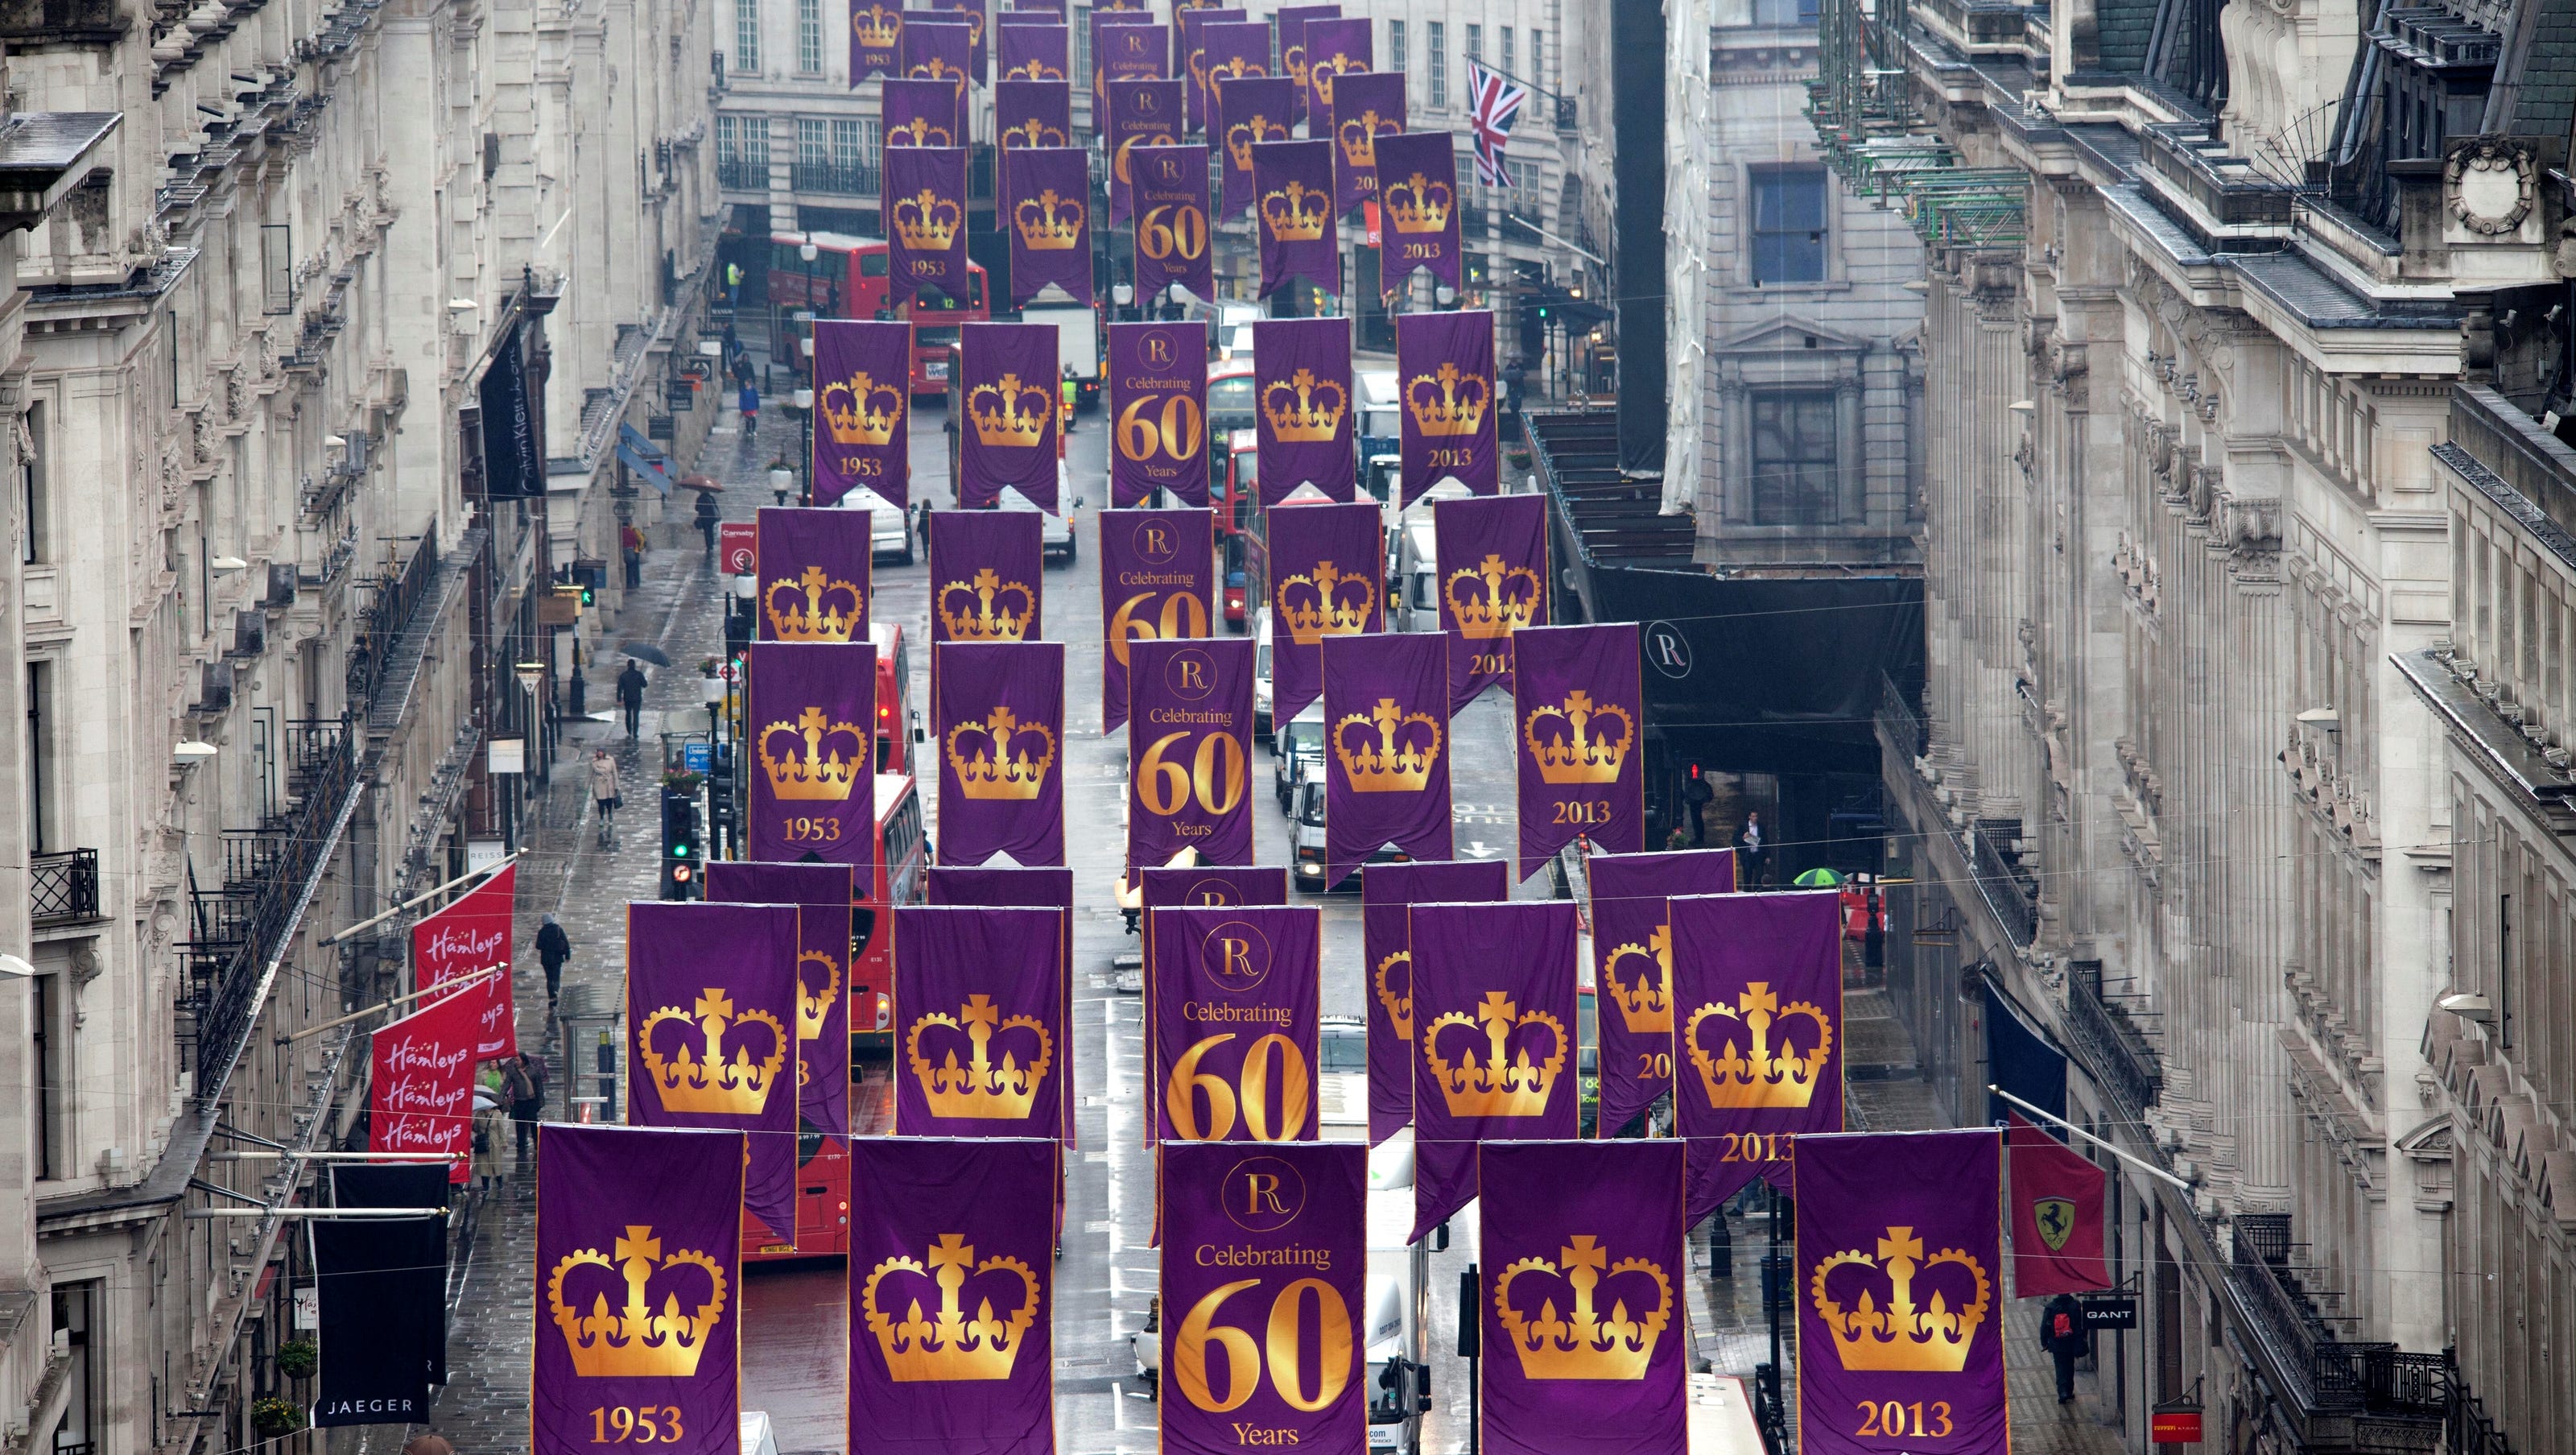 London Dresses Up For Queens Coronation Anniversary